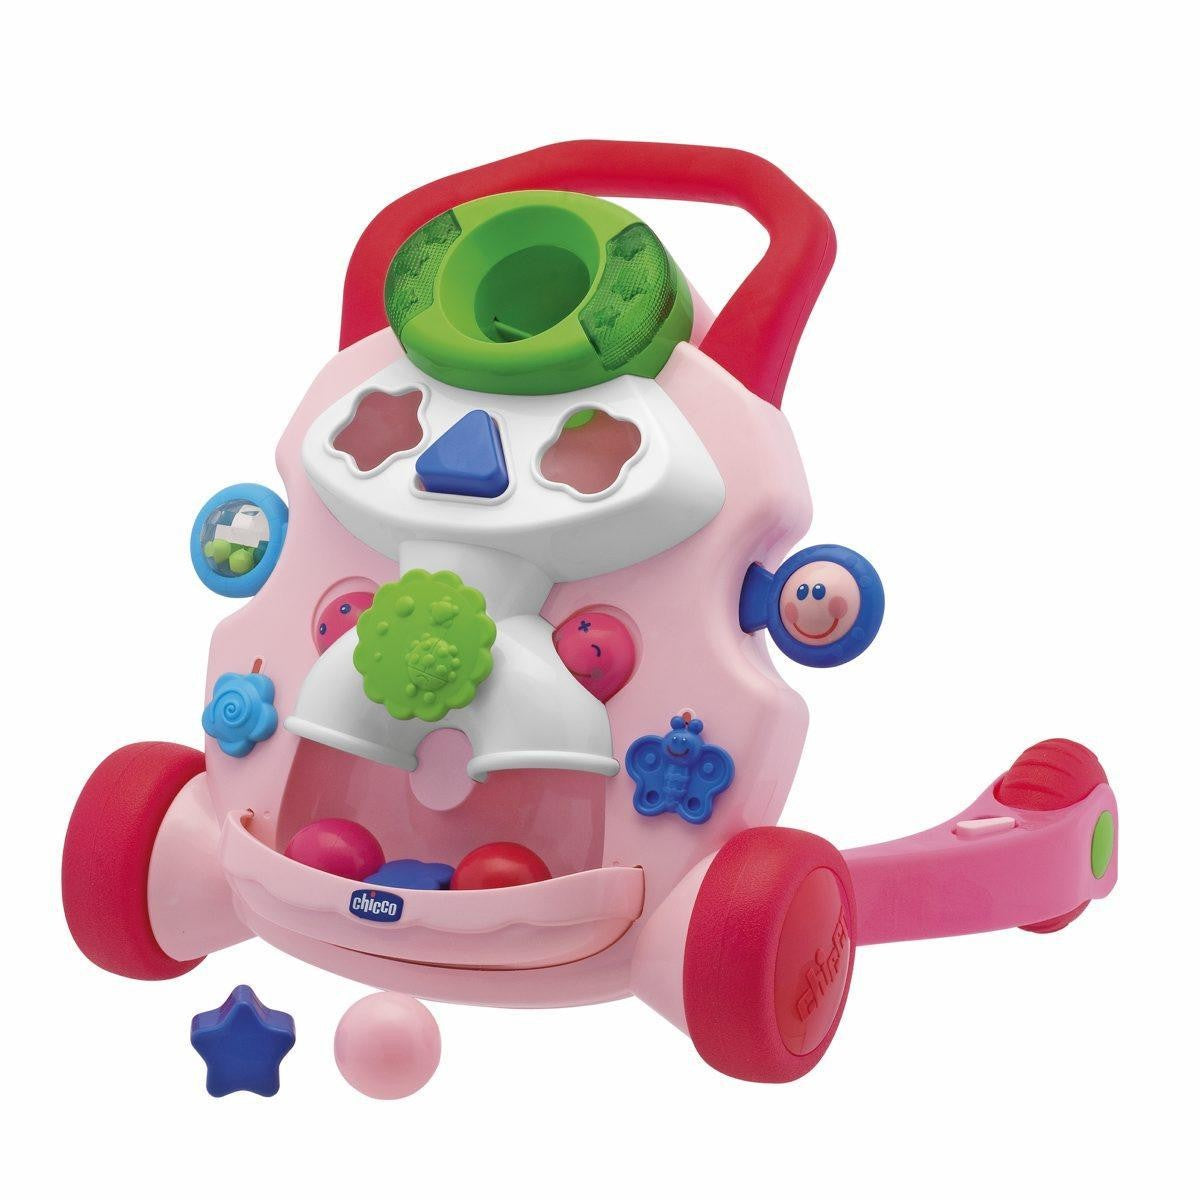 Chicco 2 in 1 Mobil